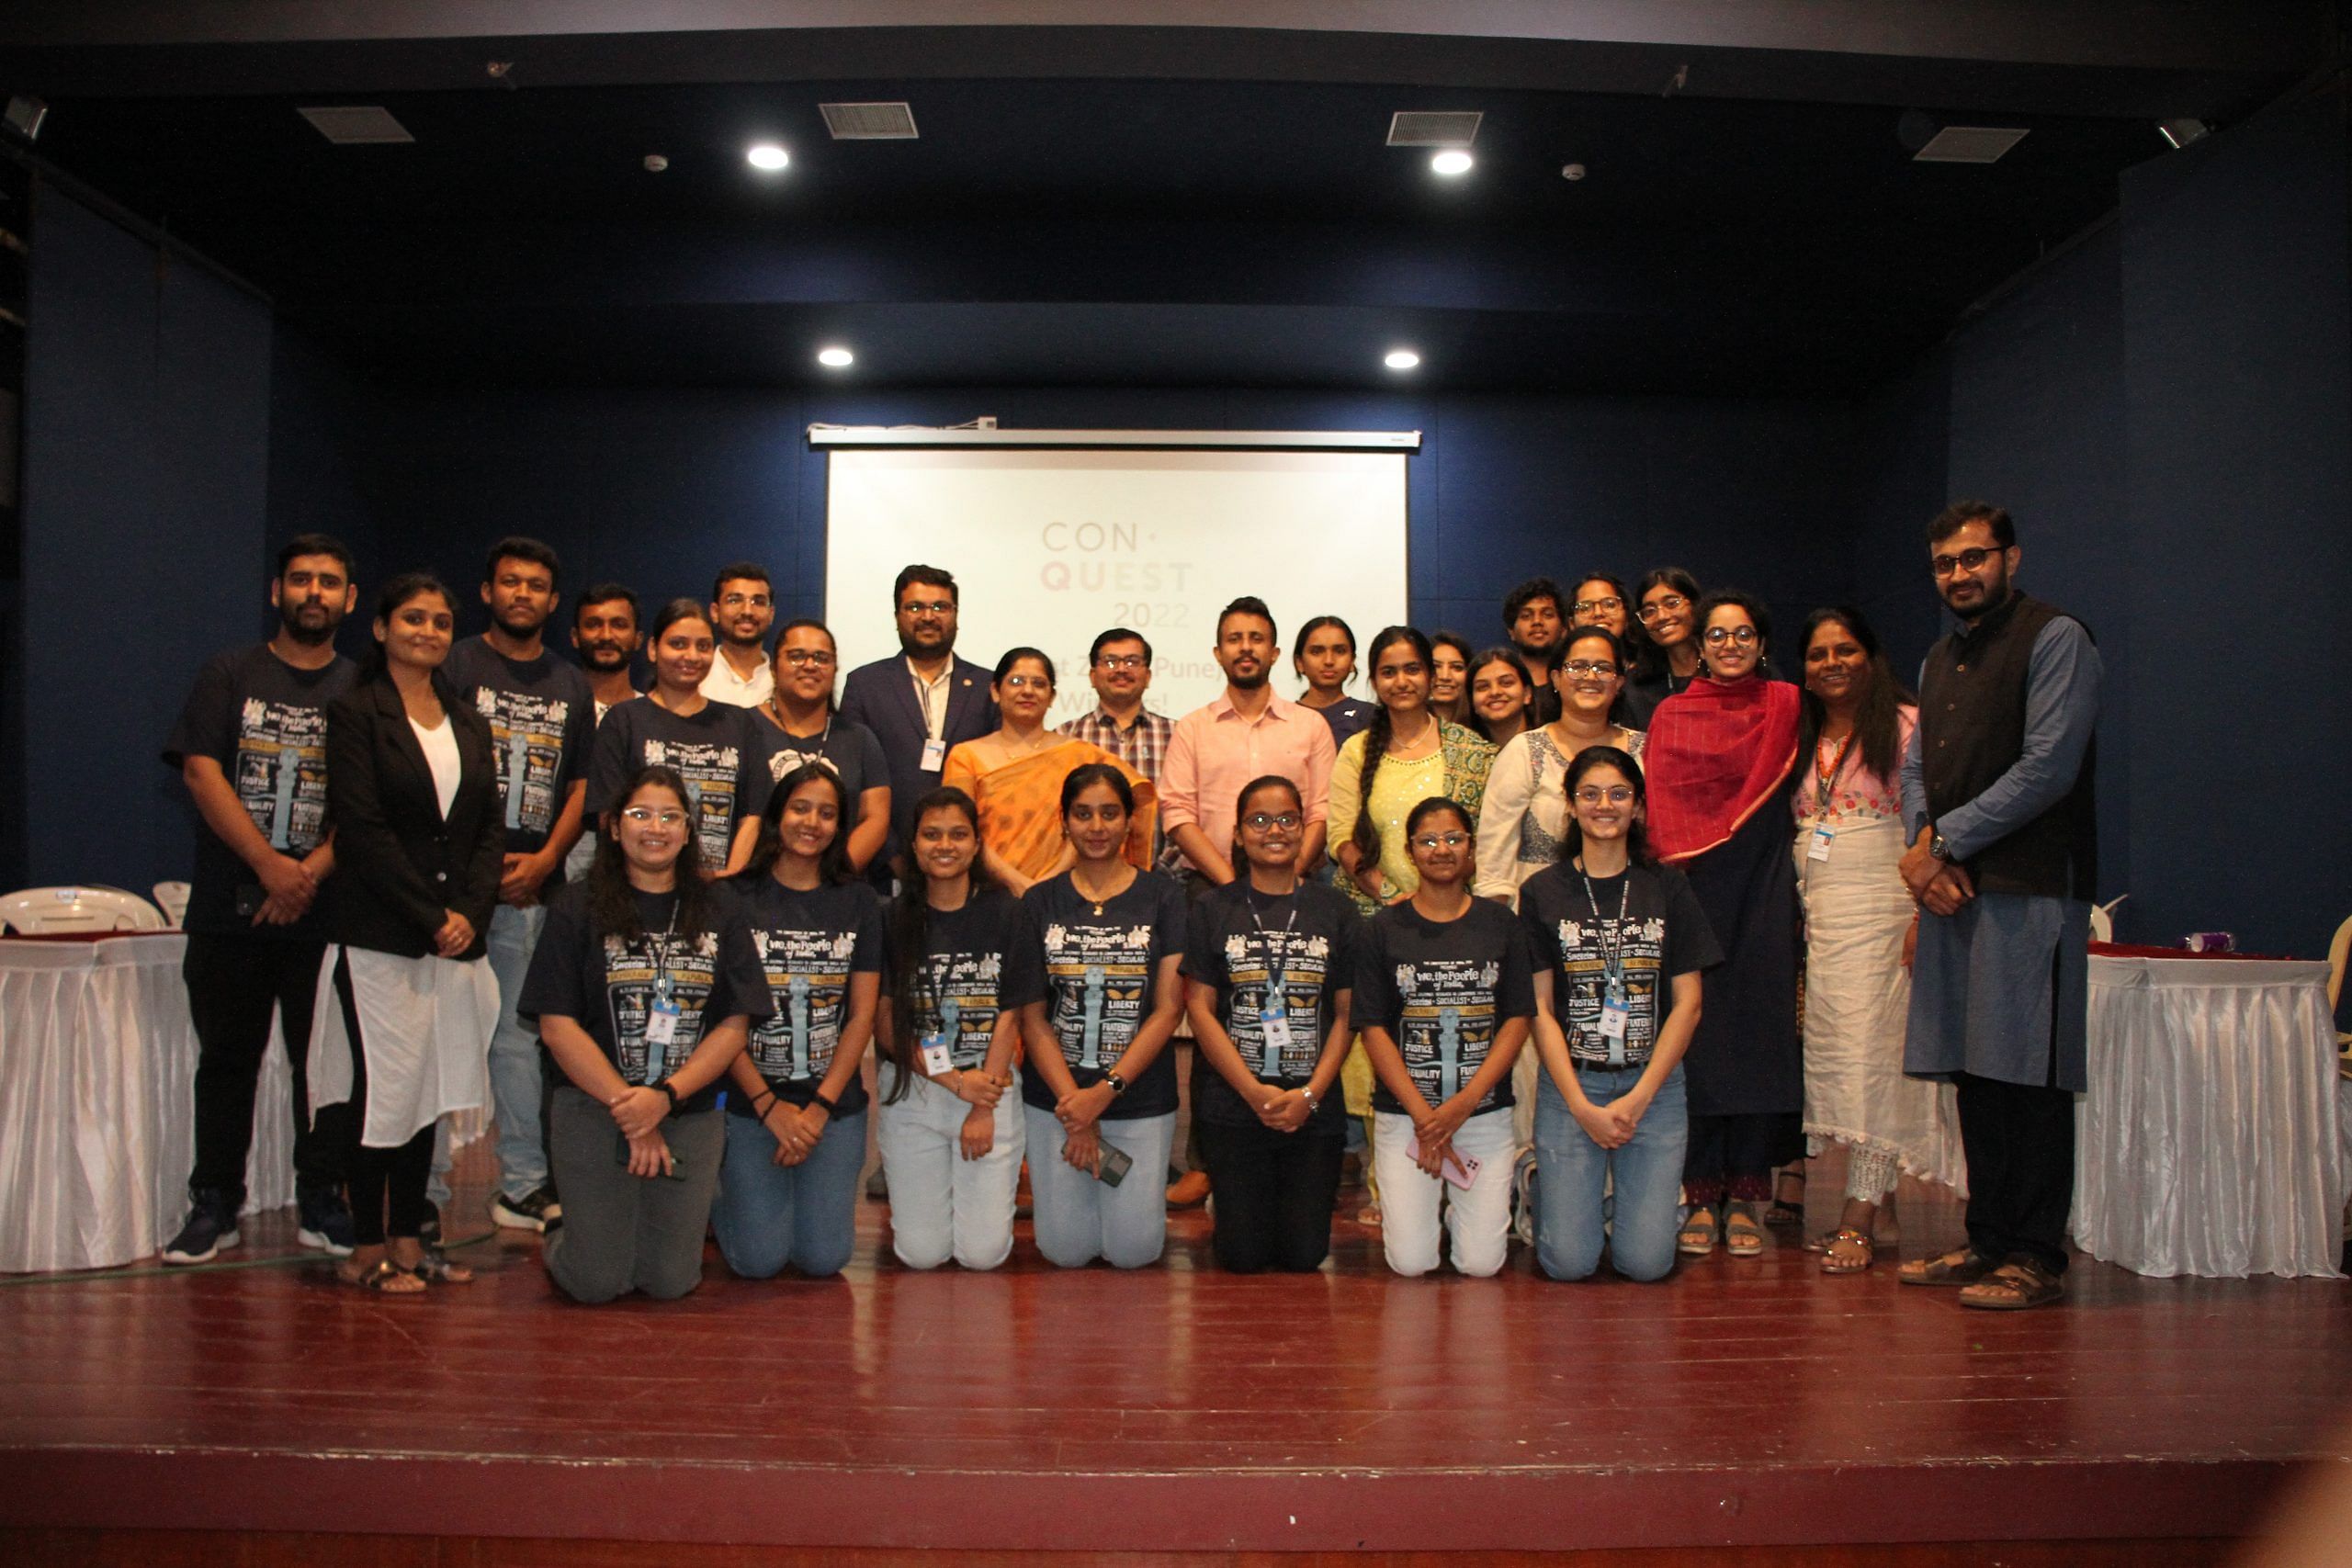 Picture of the CLPR team + volunteers and faculty from Shankarrao Chavan Law College